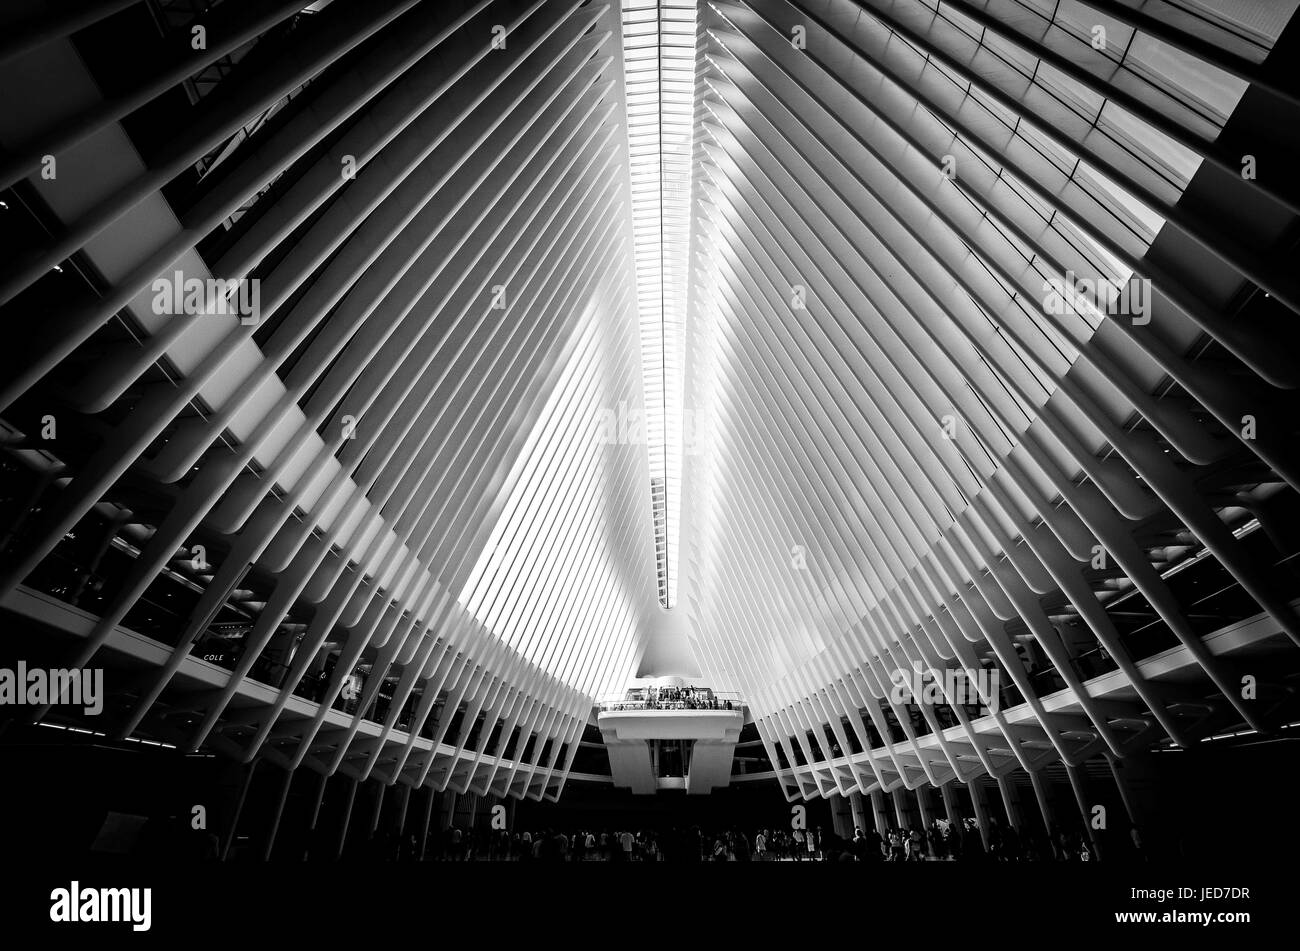 New York City, New York, USA. 24th Aug, 2016. The Oculus, the common name of the structure that houses the Westfield Stores at the WTC. After the 9/11 attacks, the WTC shopping mall was closed until 2016. Estimated cost was $4 billion. It also serves as the PATH train entrance. Credit: Sachelle Babbar/ZUMA Wire/Alamy Live News Stock Photo